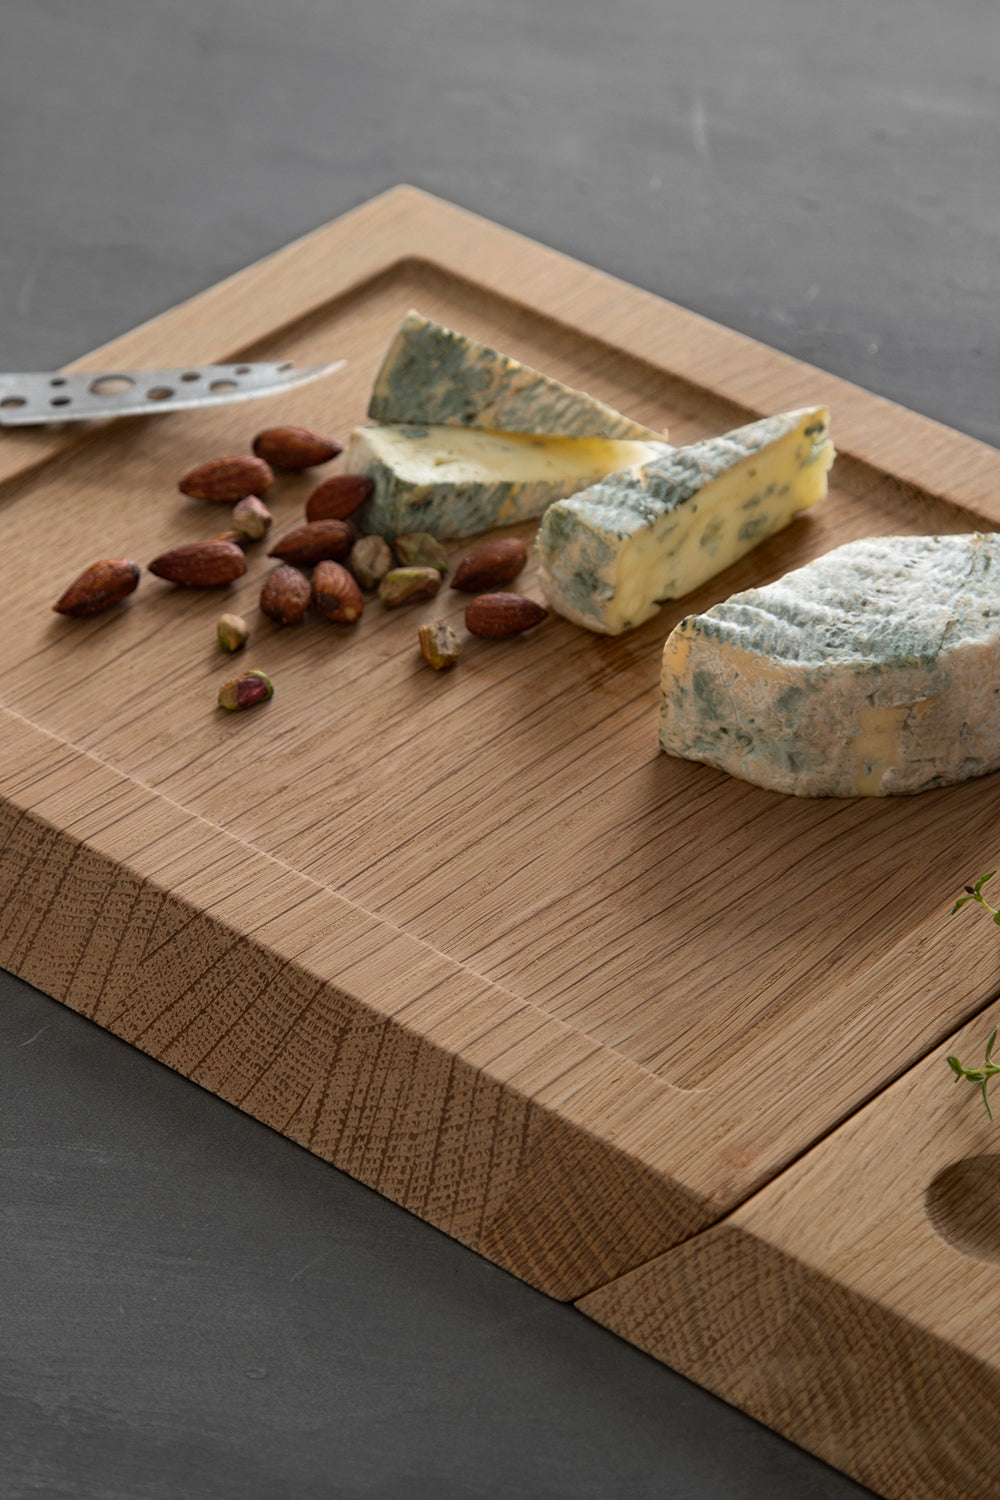 EKTA Living Cutting Board - a wooden cutting board with cheese and some nuts on it